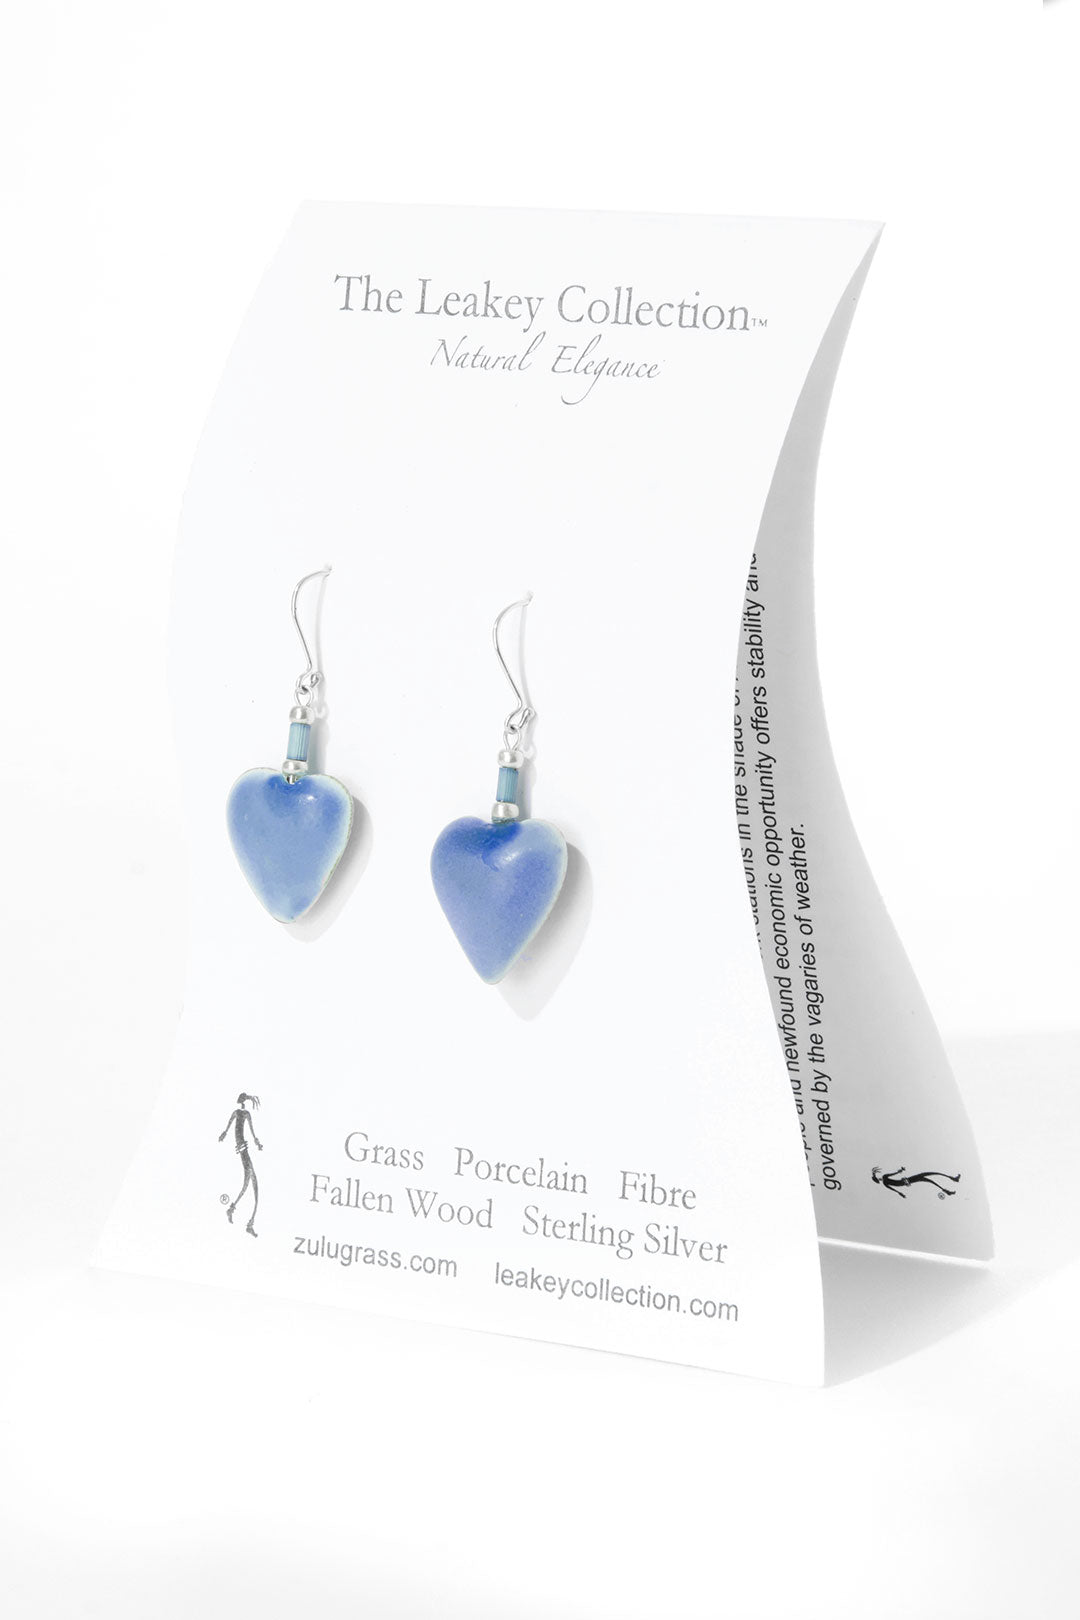 Follow Your Heart Handcrafted Porcelain Earrings Default Title